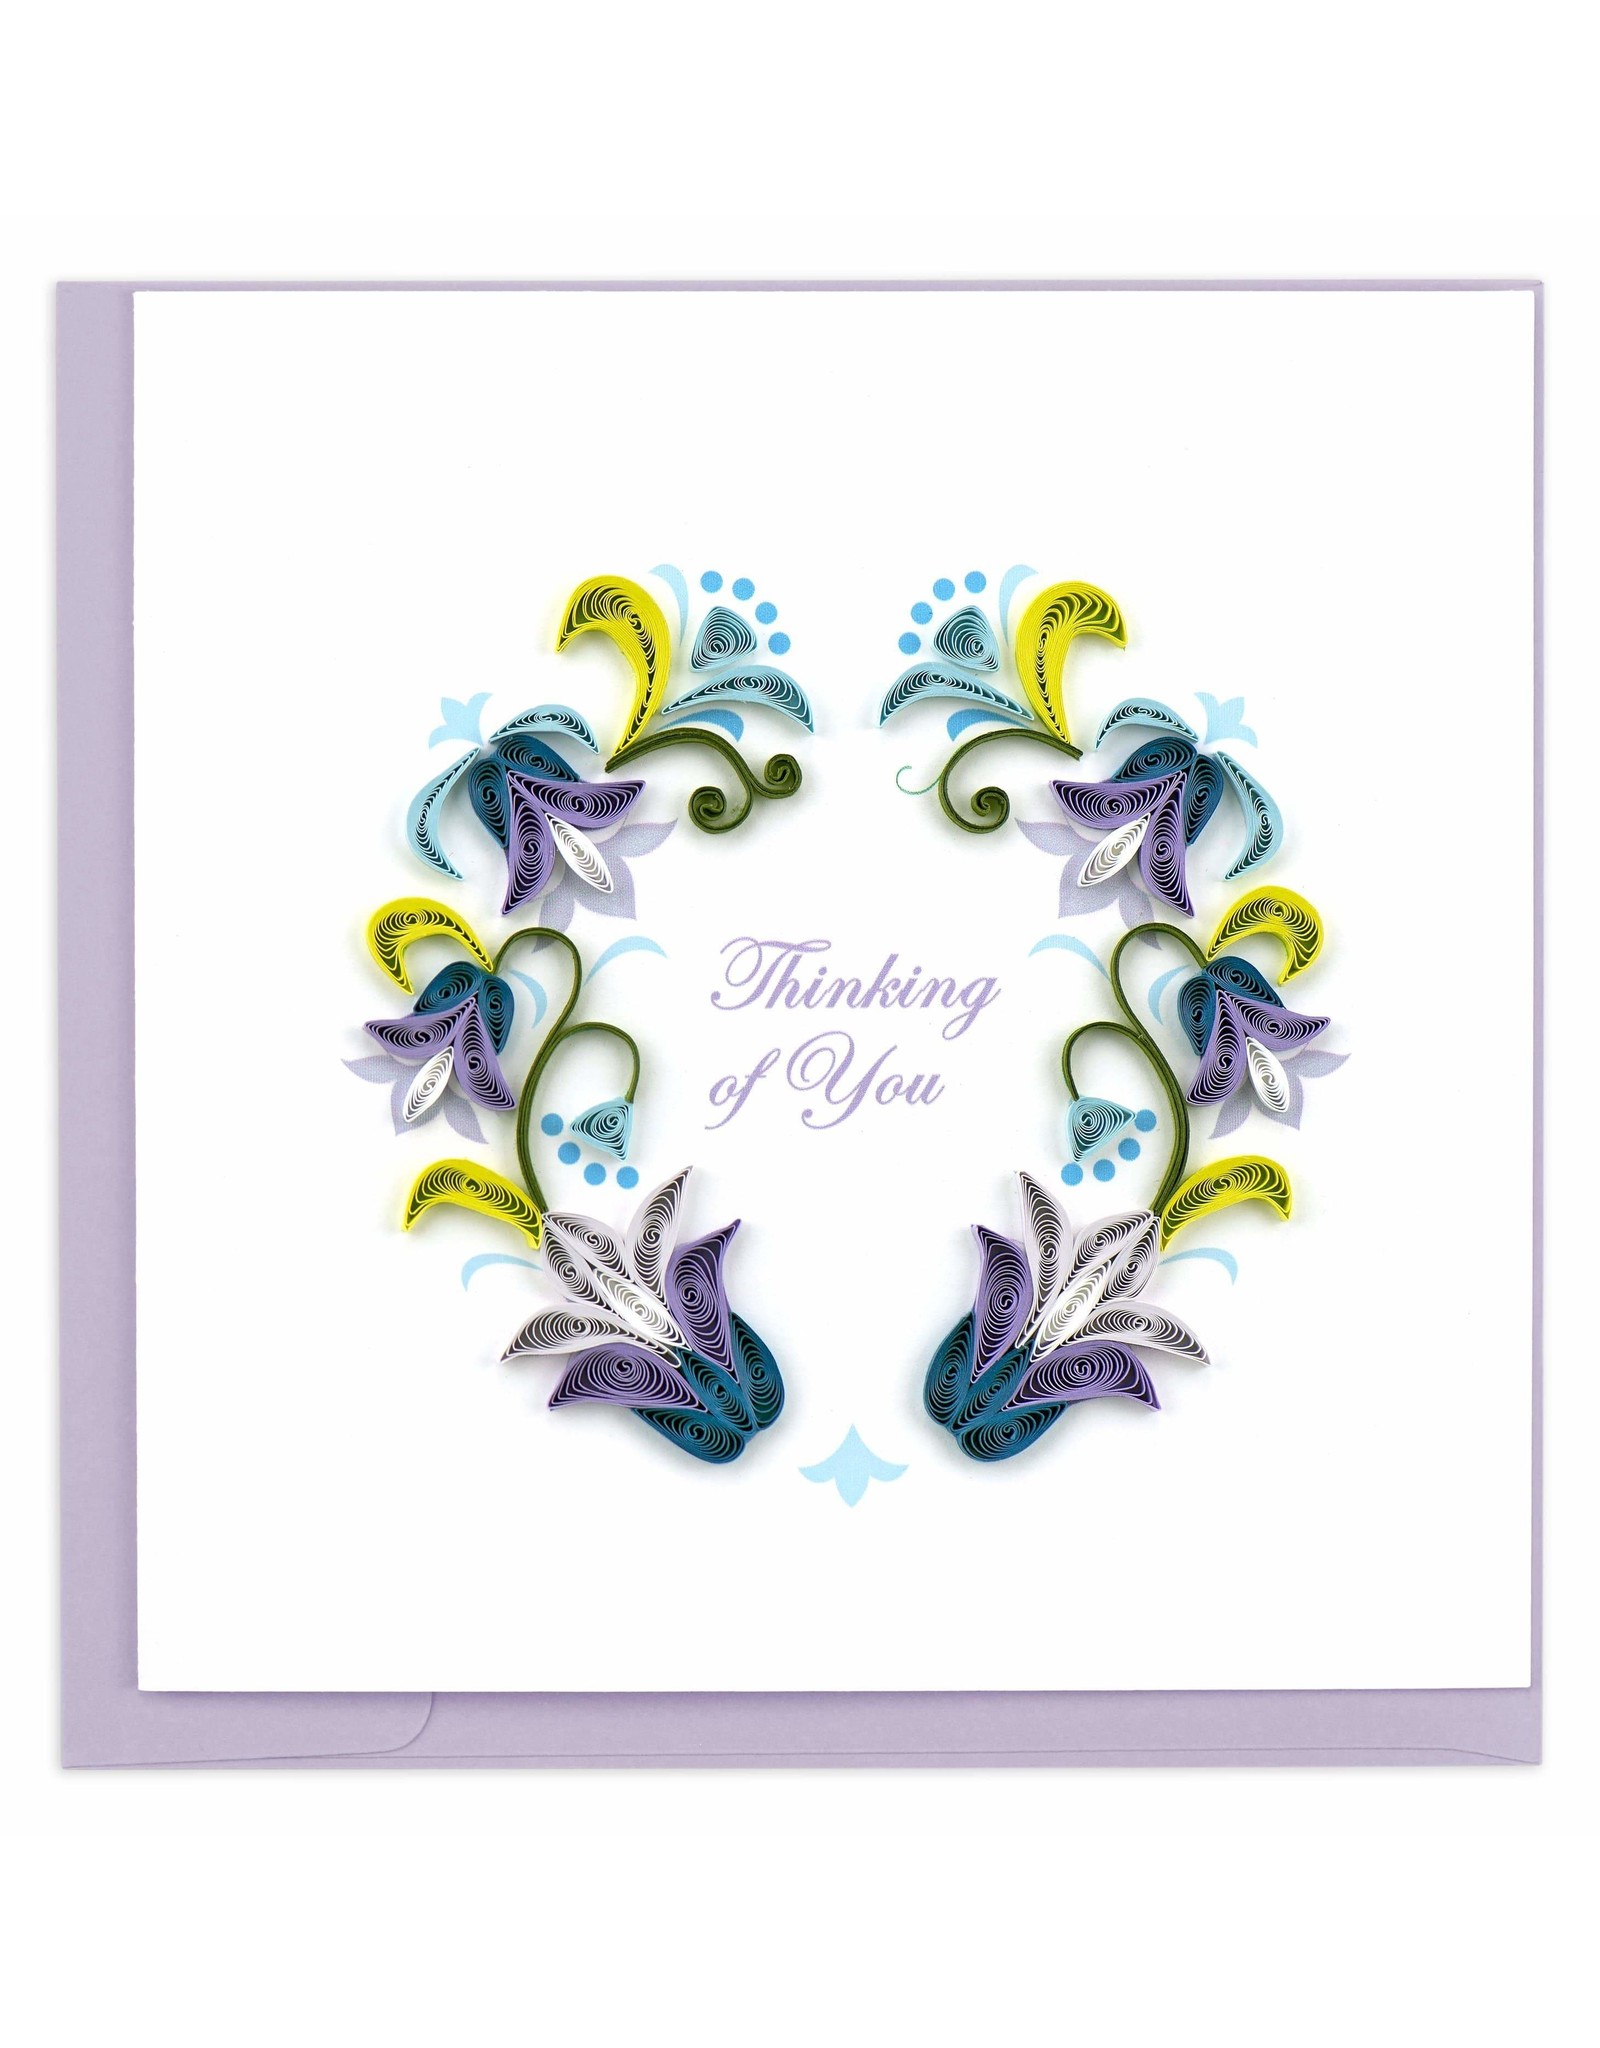 Trade roots Thinking of You Quilling Card, VIetnam